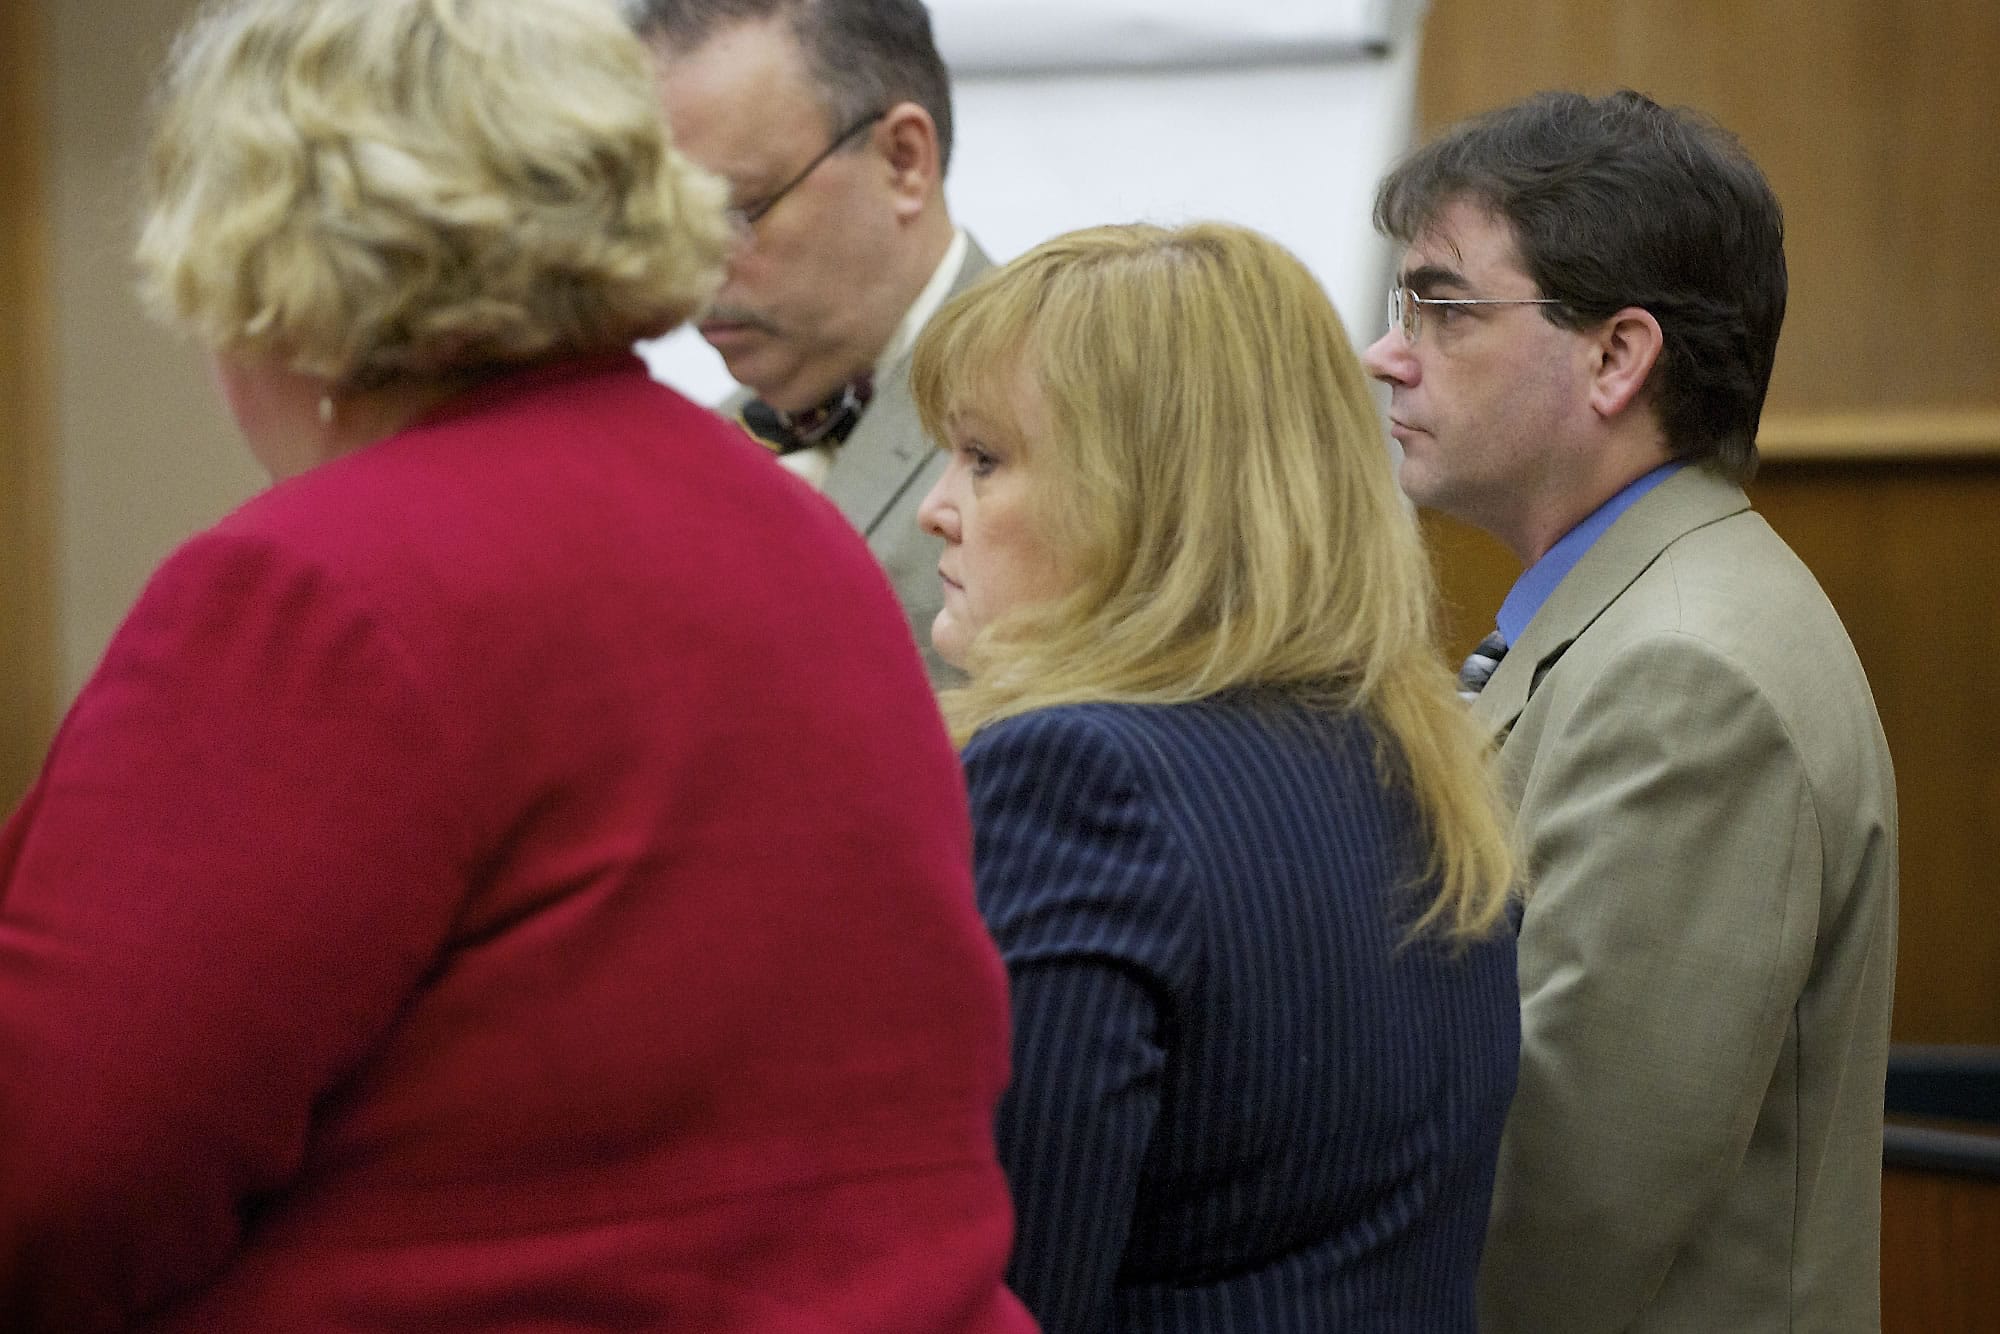 Sandra Weller, center, and Jeffrey Weller, background right, stand as the jury enter the courtroom for the start of their trial Tuesday.